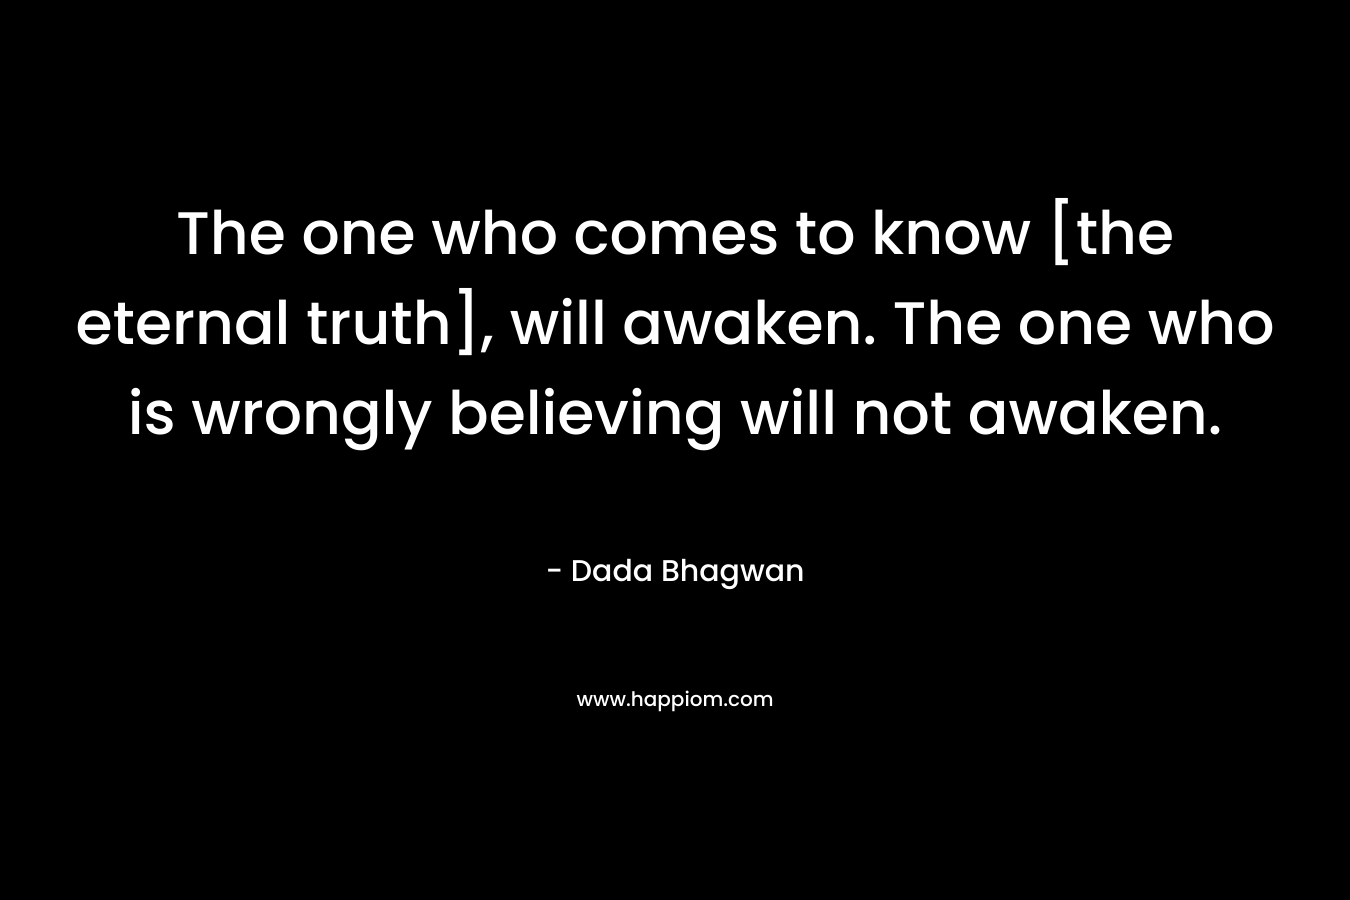 The one who comes to know [the eternal truth], will awaken. The one who is wrongly believing will not awaken.